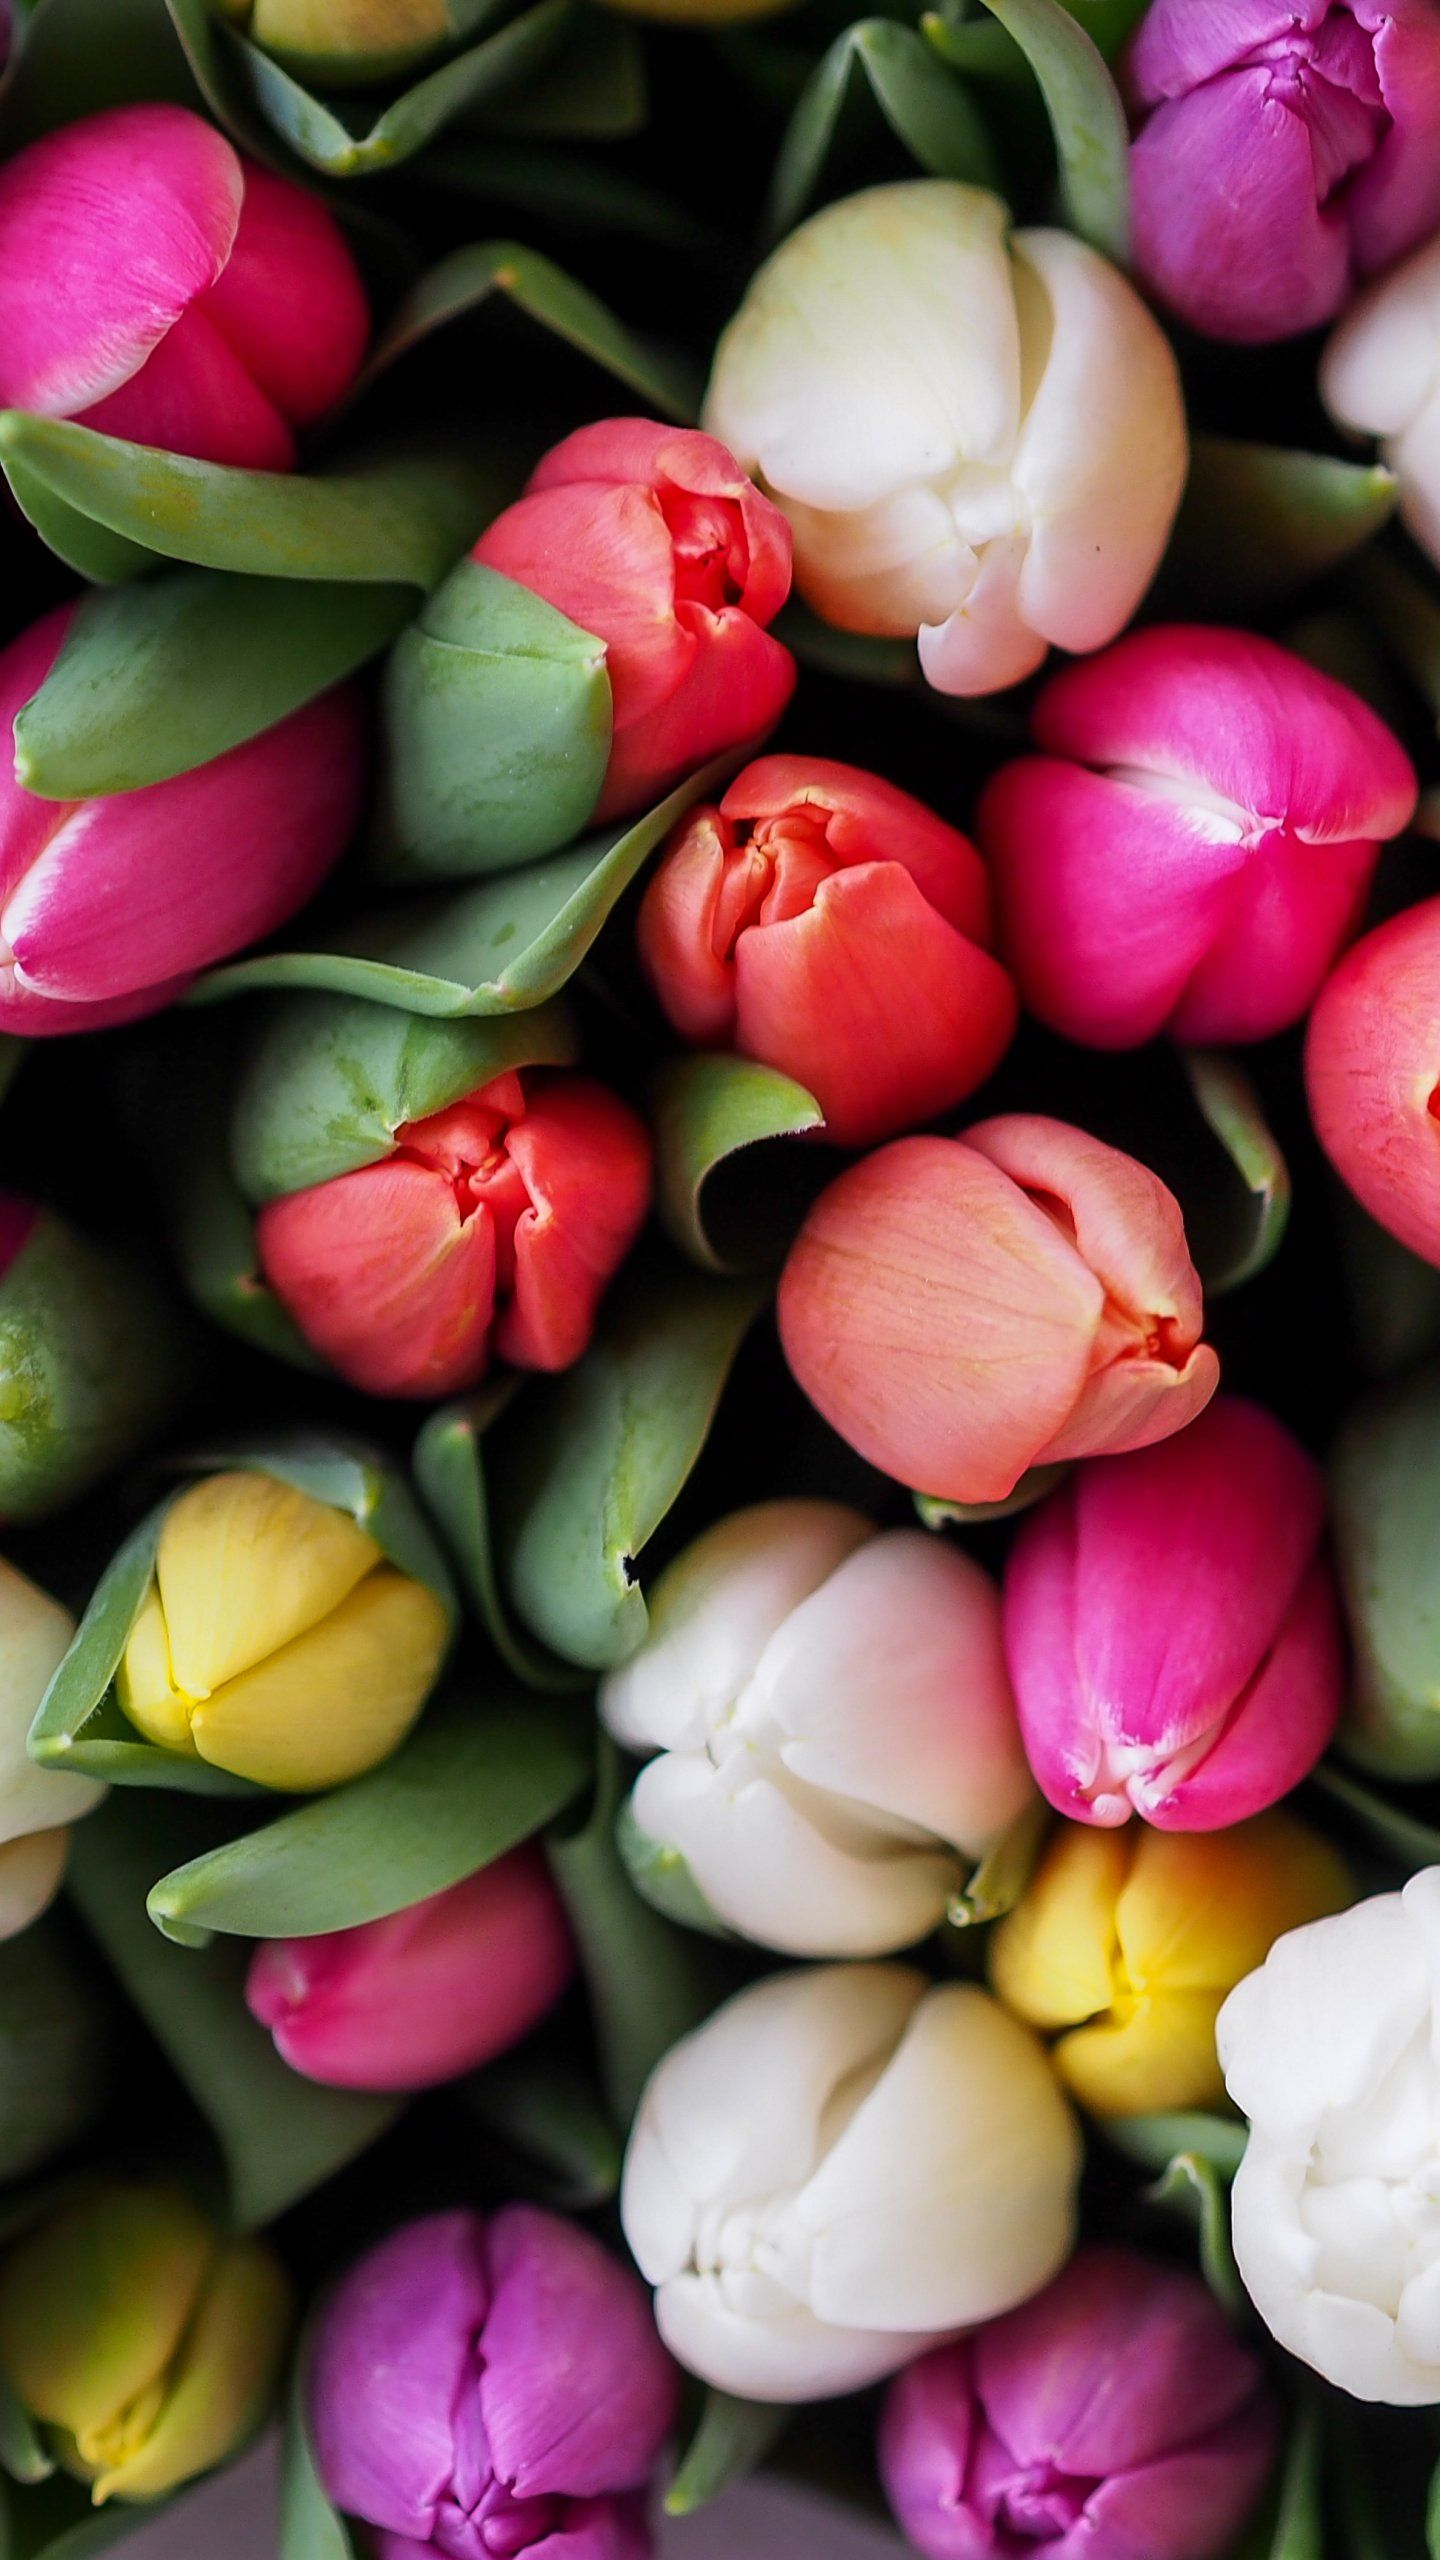 1440x2560 Tulips Bouquet Wallpaper iPhone, Android \u0026 Desktop Backgrounds | Spring flowers background, Flower background wallpaper, Flower backgrounds